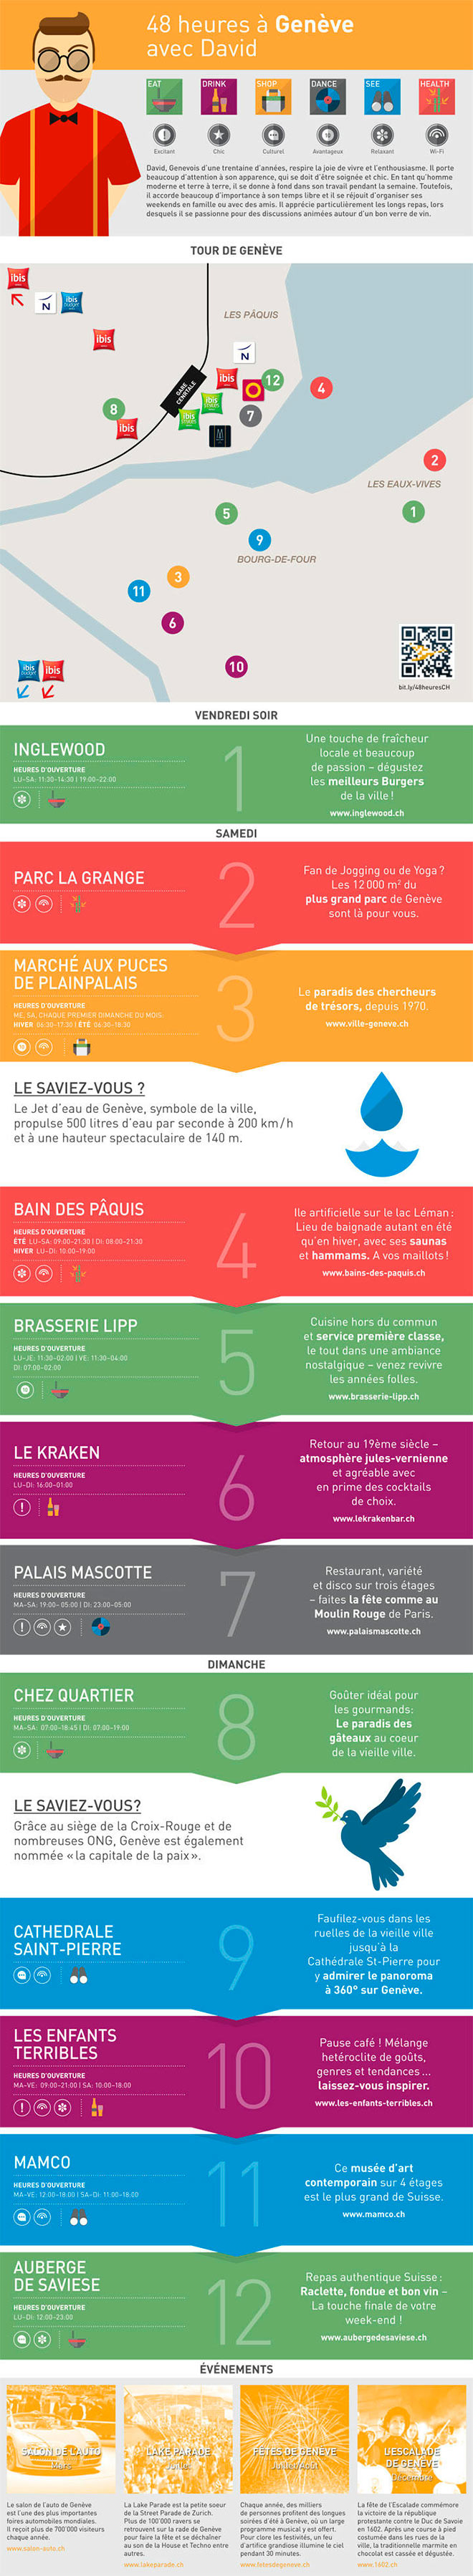 Geneve infographics by all.accor.com